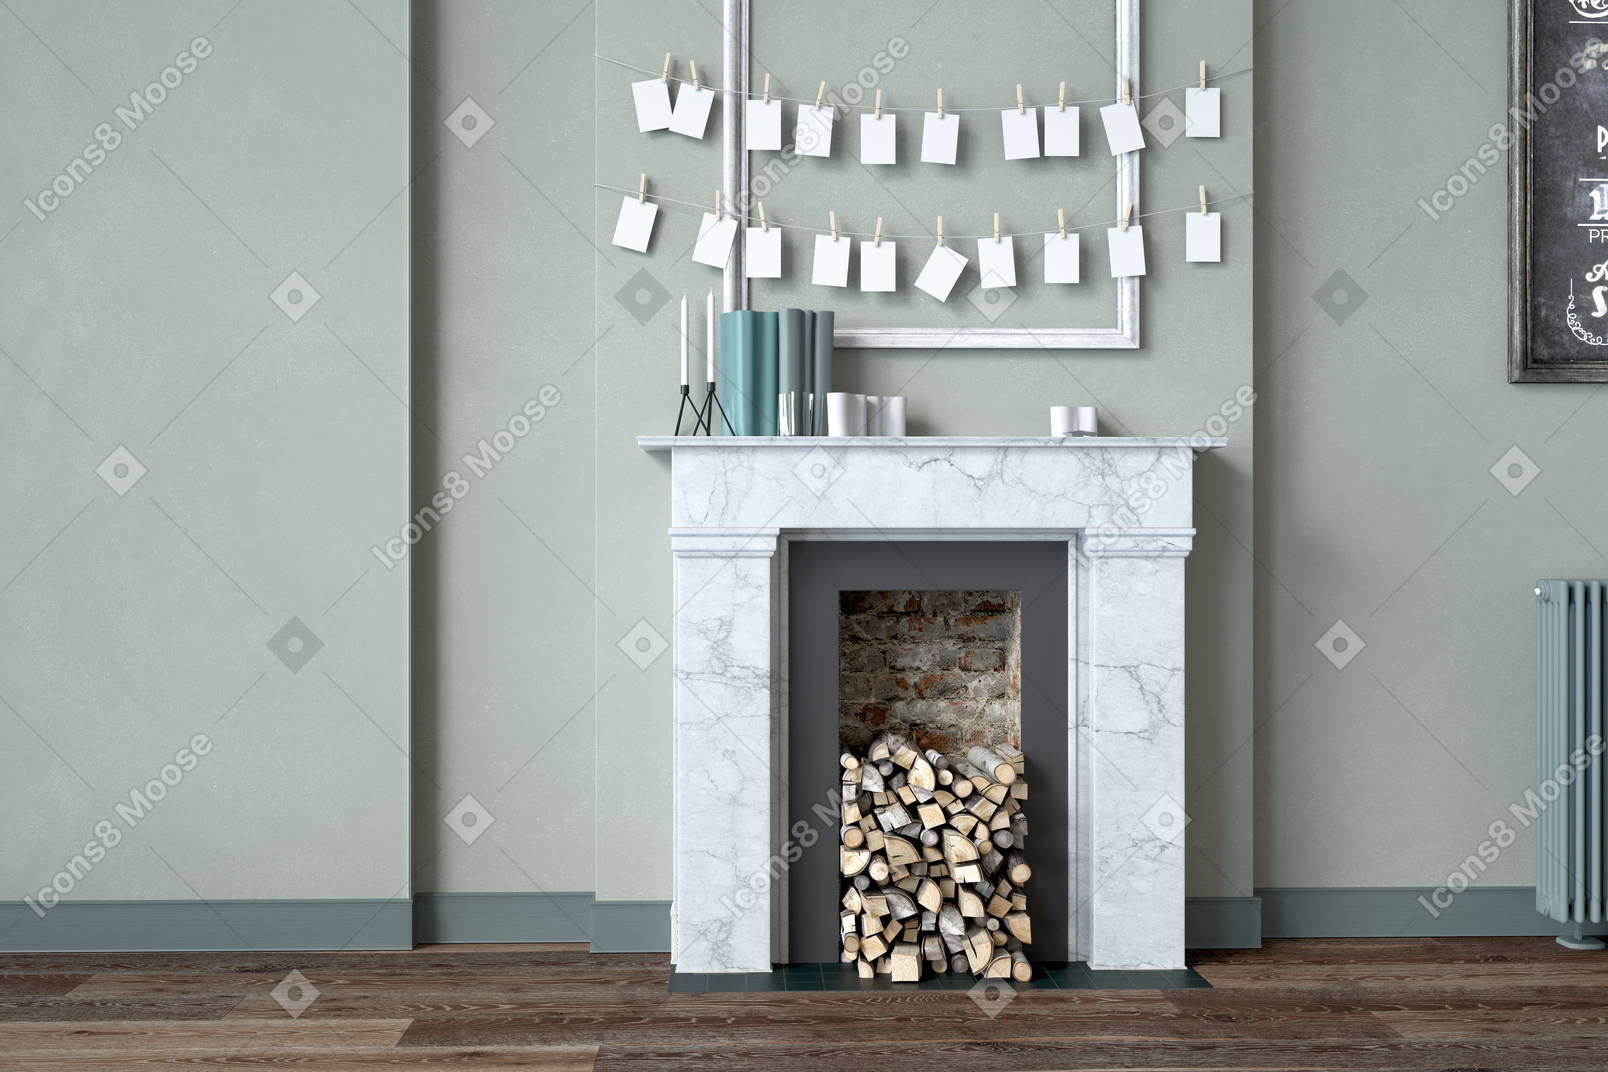 Cozy room with a fireplace and some memo cards above it